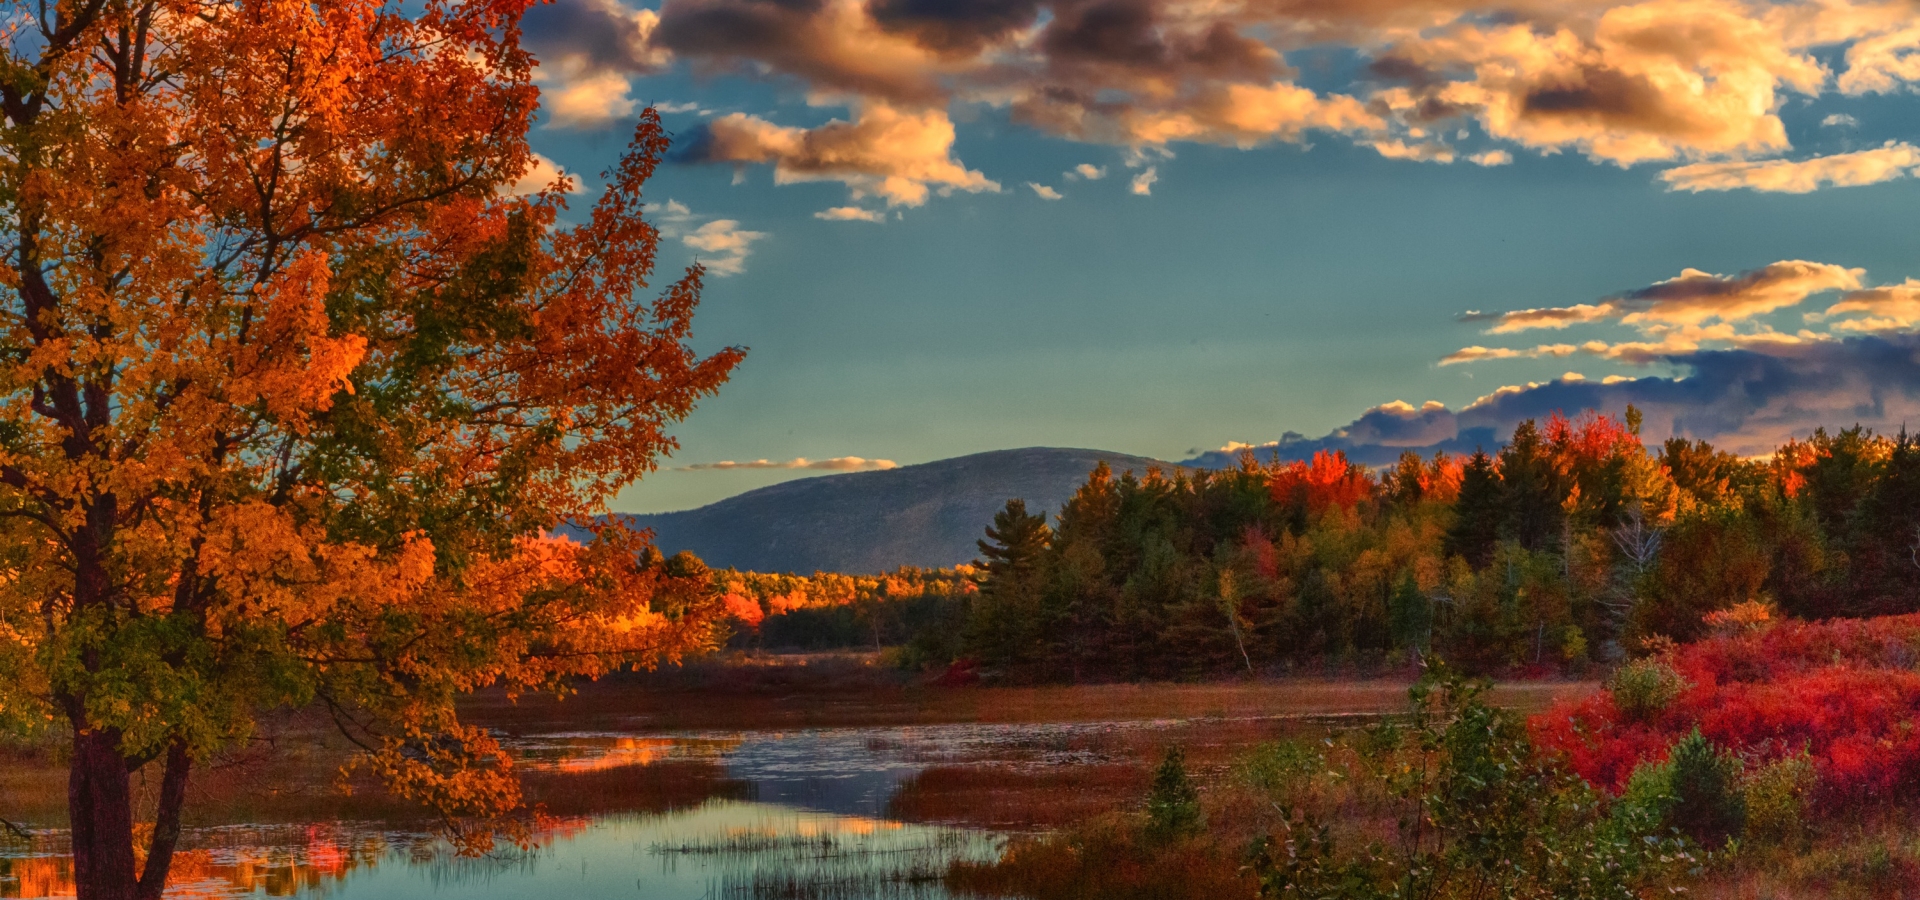 Fall in New England: When & Where to Go